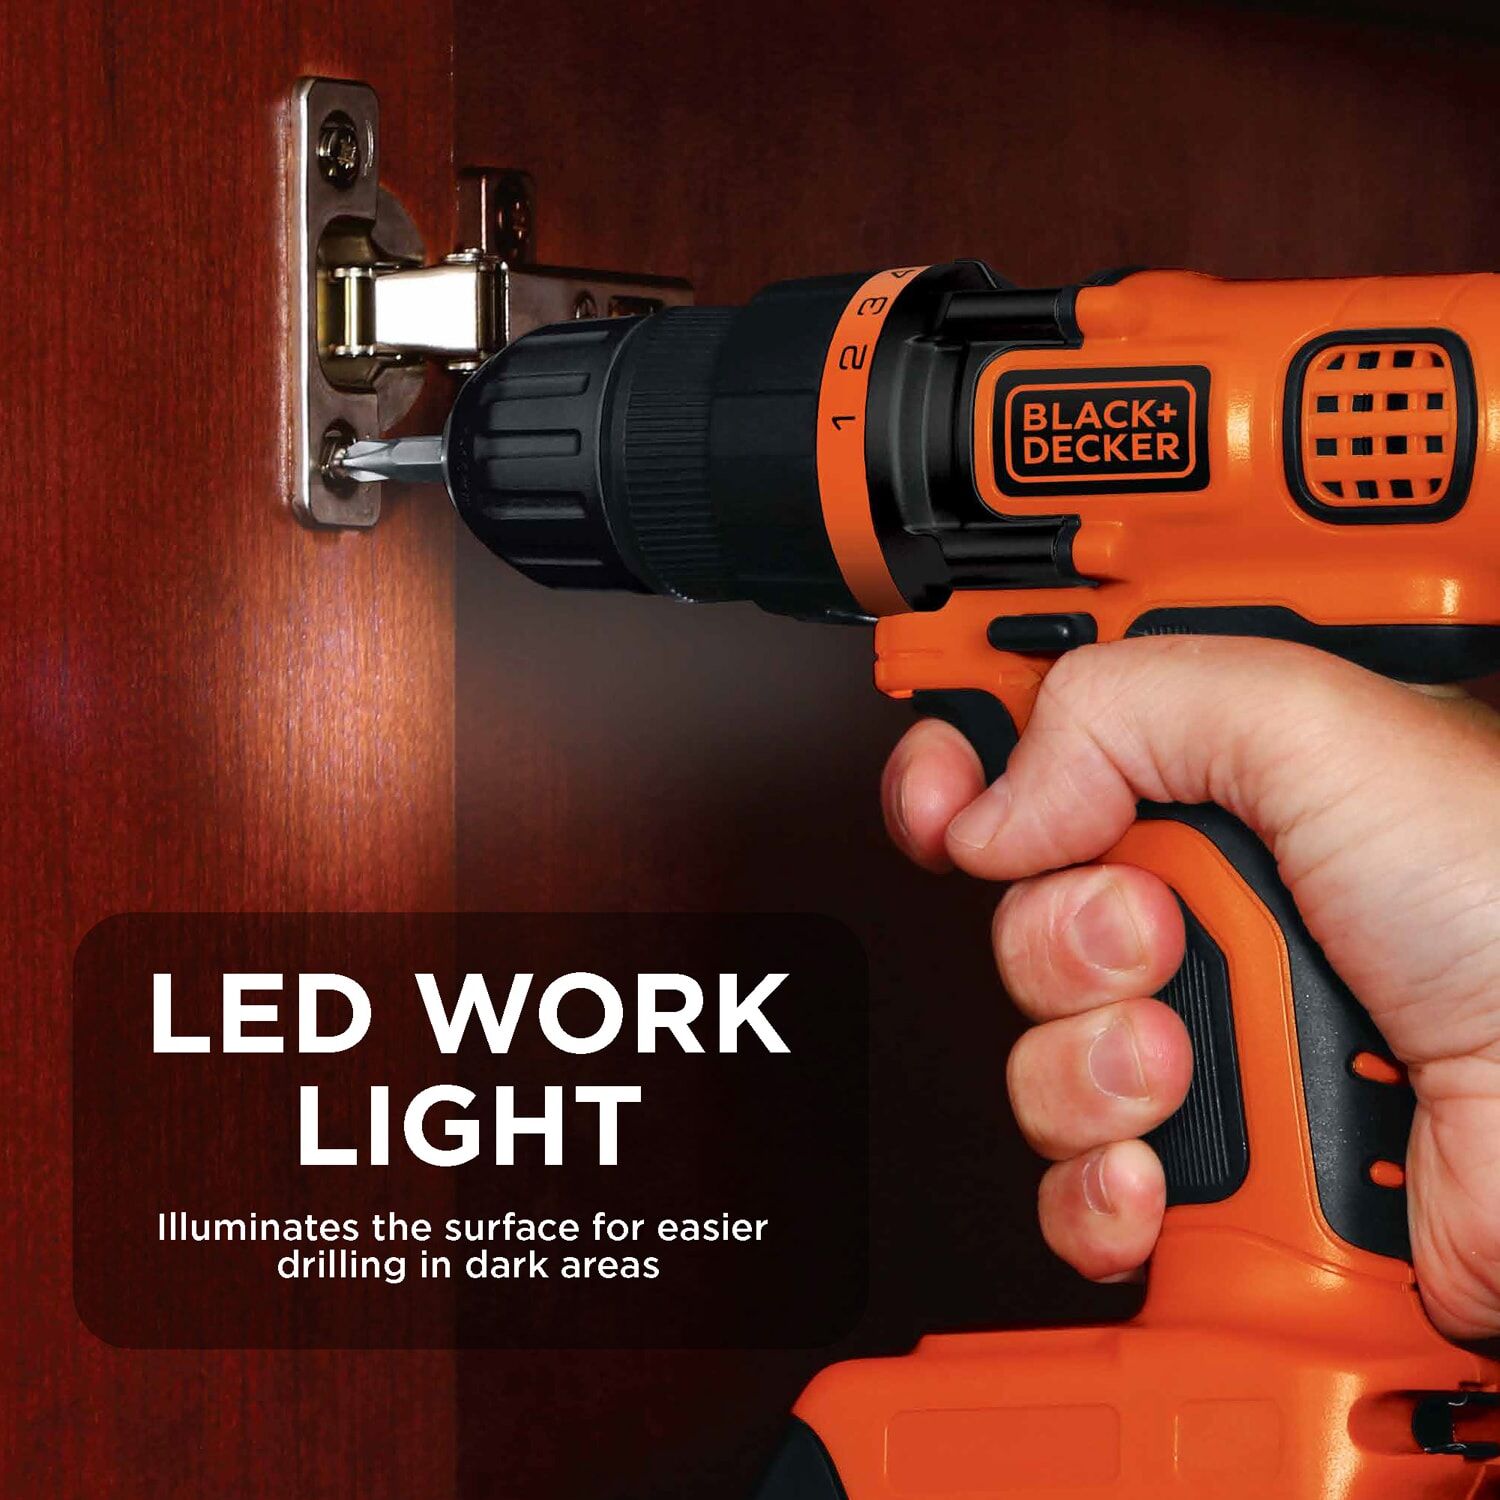 Person using a Black and Decker 20 volt max lithium ion cordless drill/driver with LED work light to drive a screw into a cabinet door